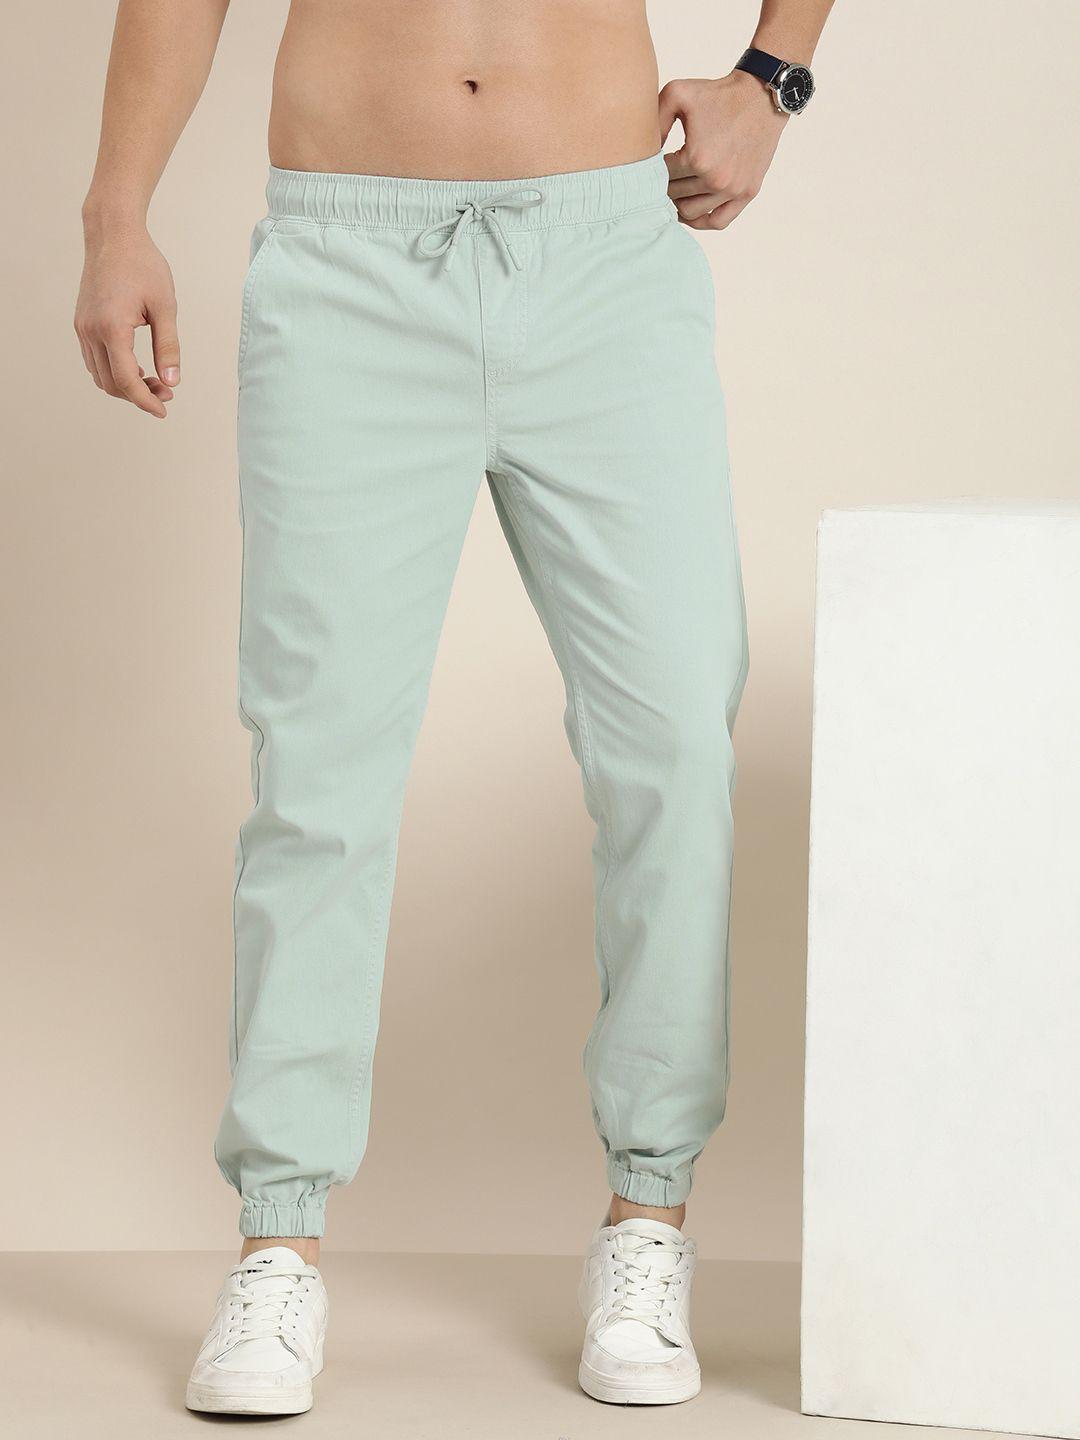 here&now men joggers trousers